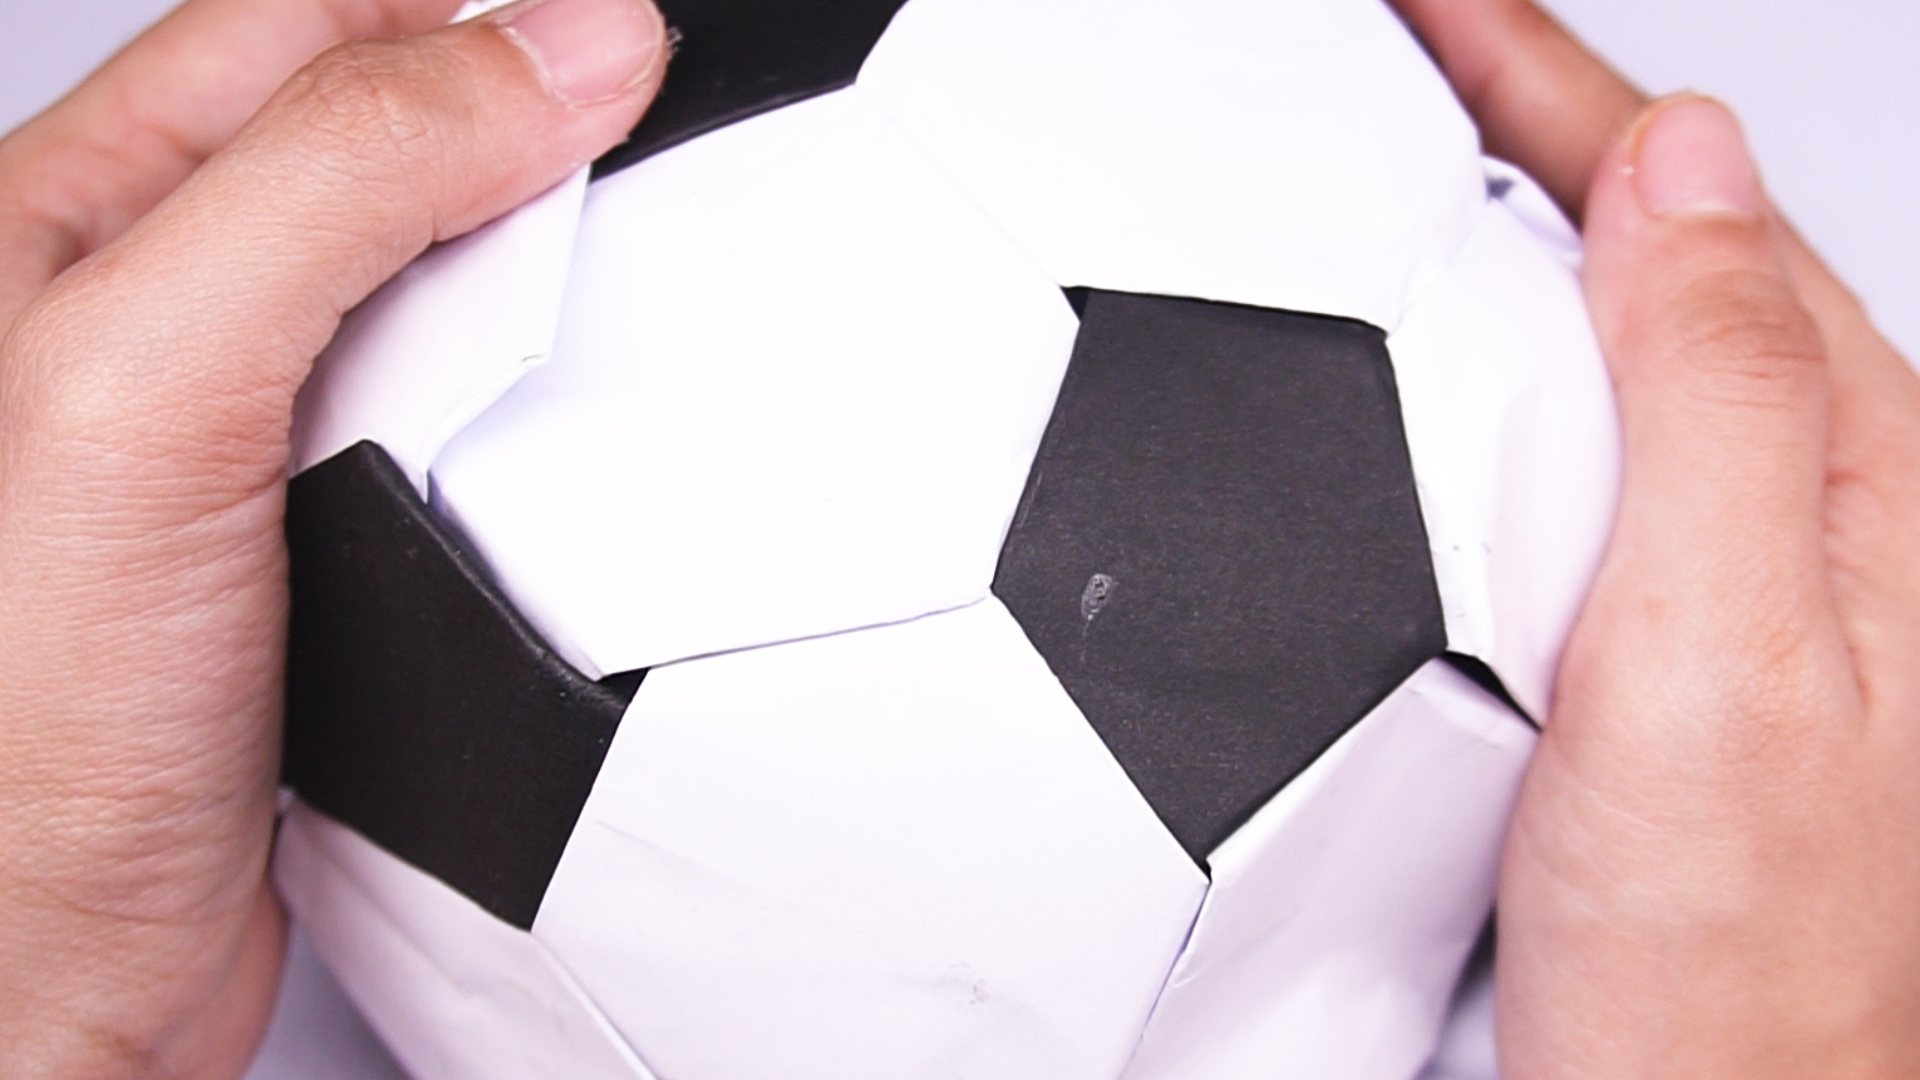 How To Make Origami Soccer Ball 3 Ways To Make An Origami Soccer Ball Wikihow